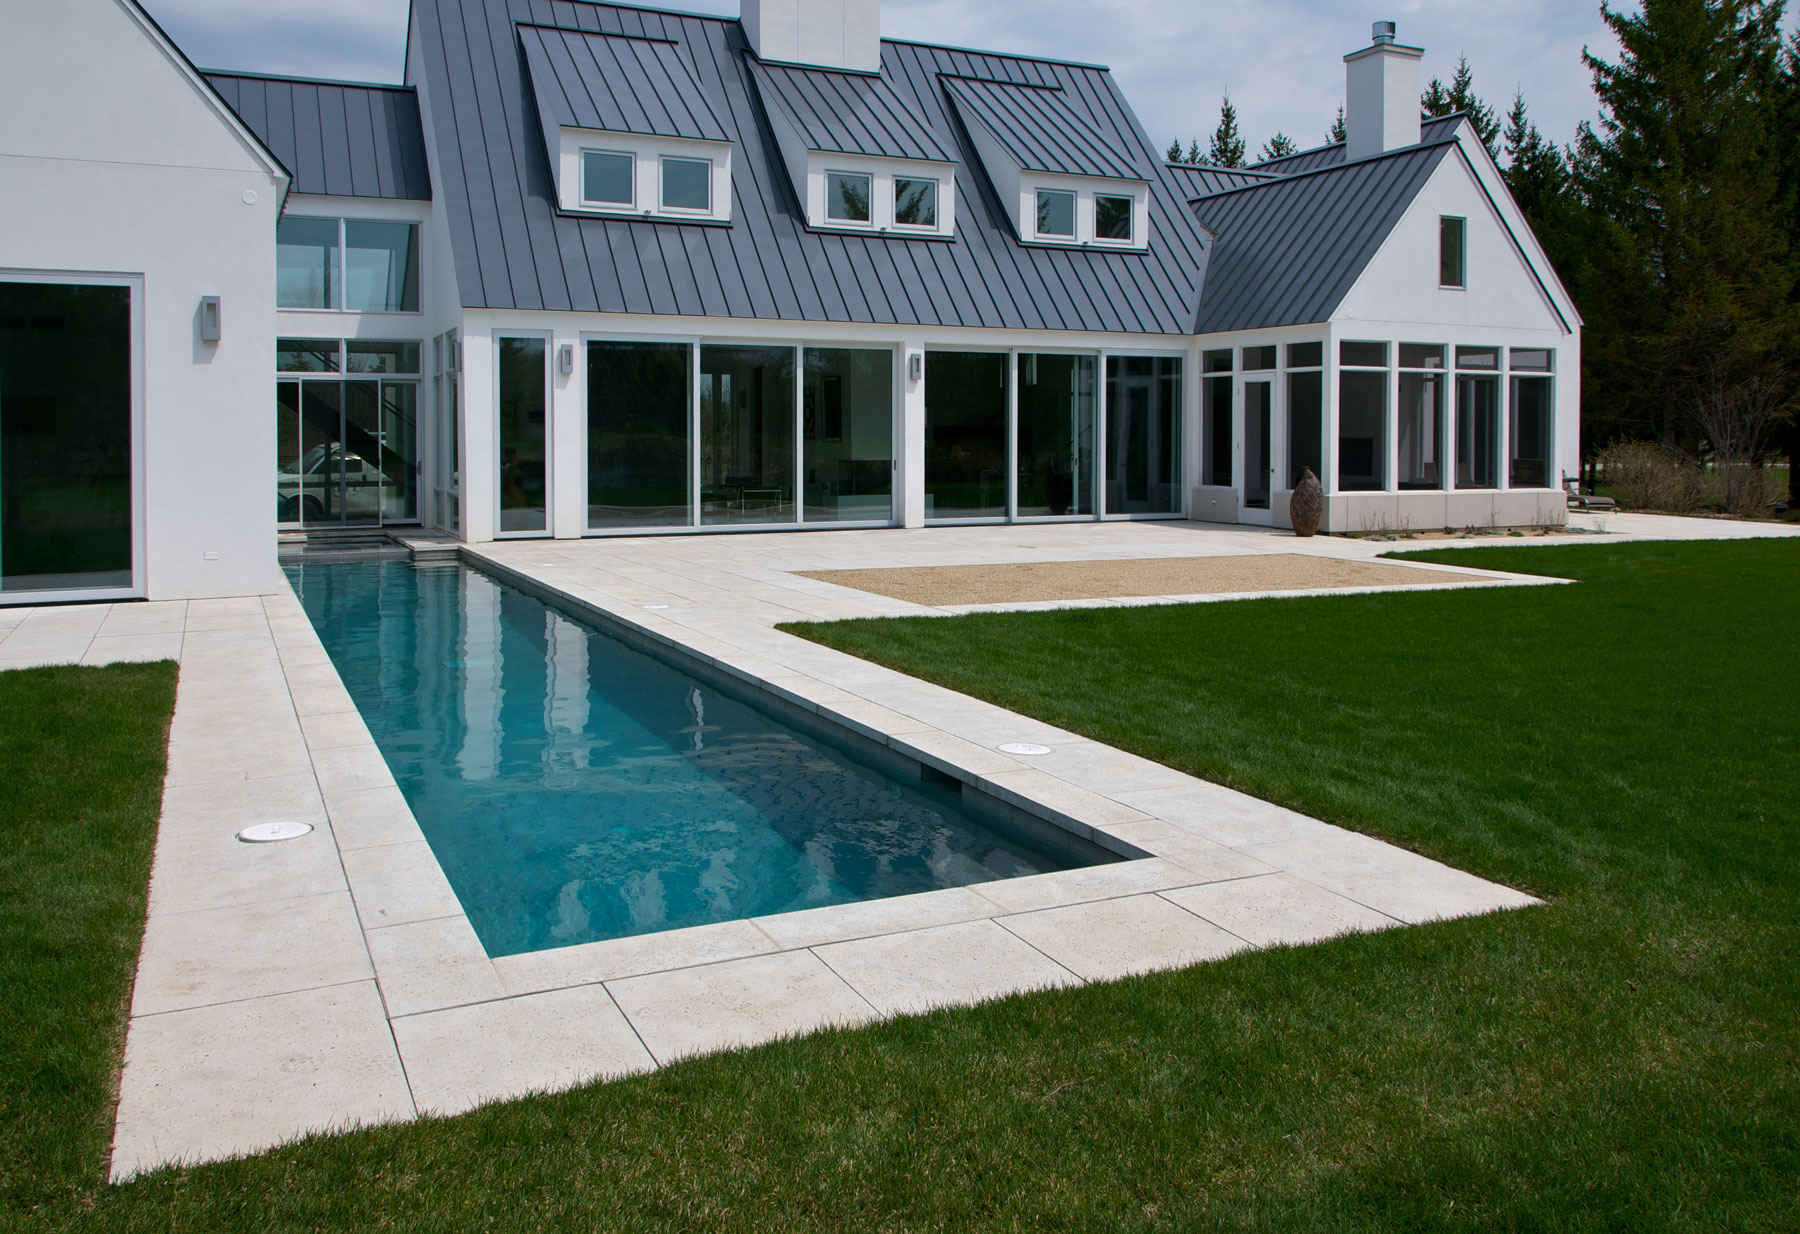 This modern pool deck hardscape features custom pool pavers and deck pavers